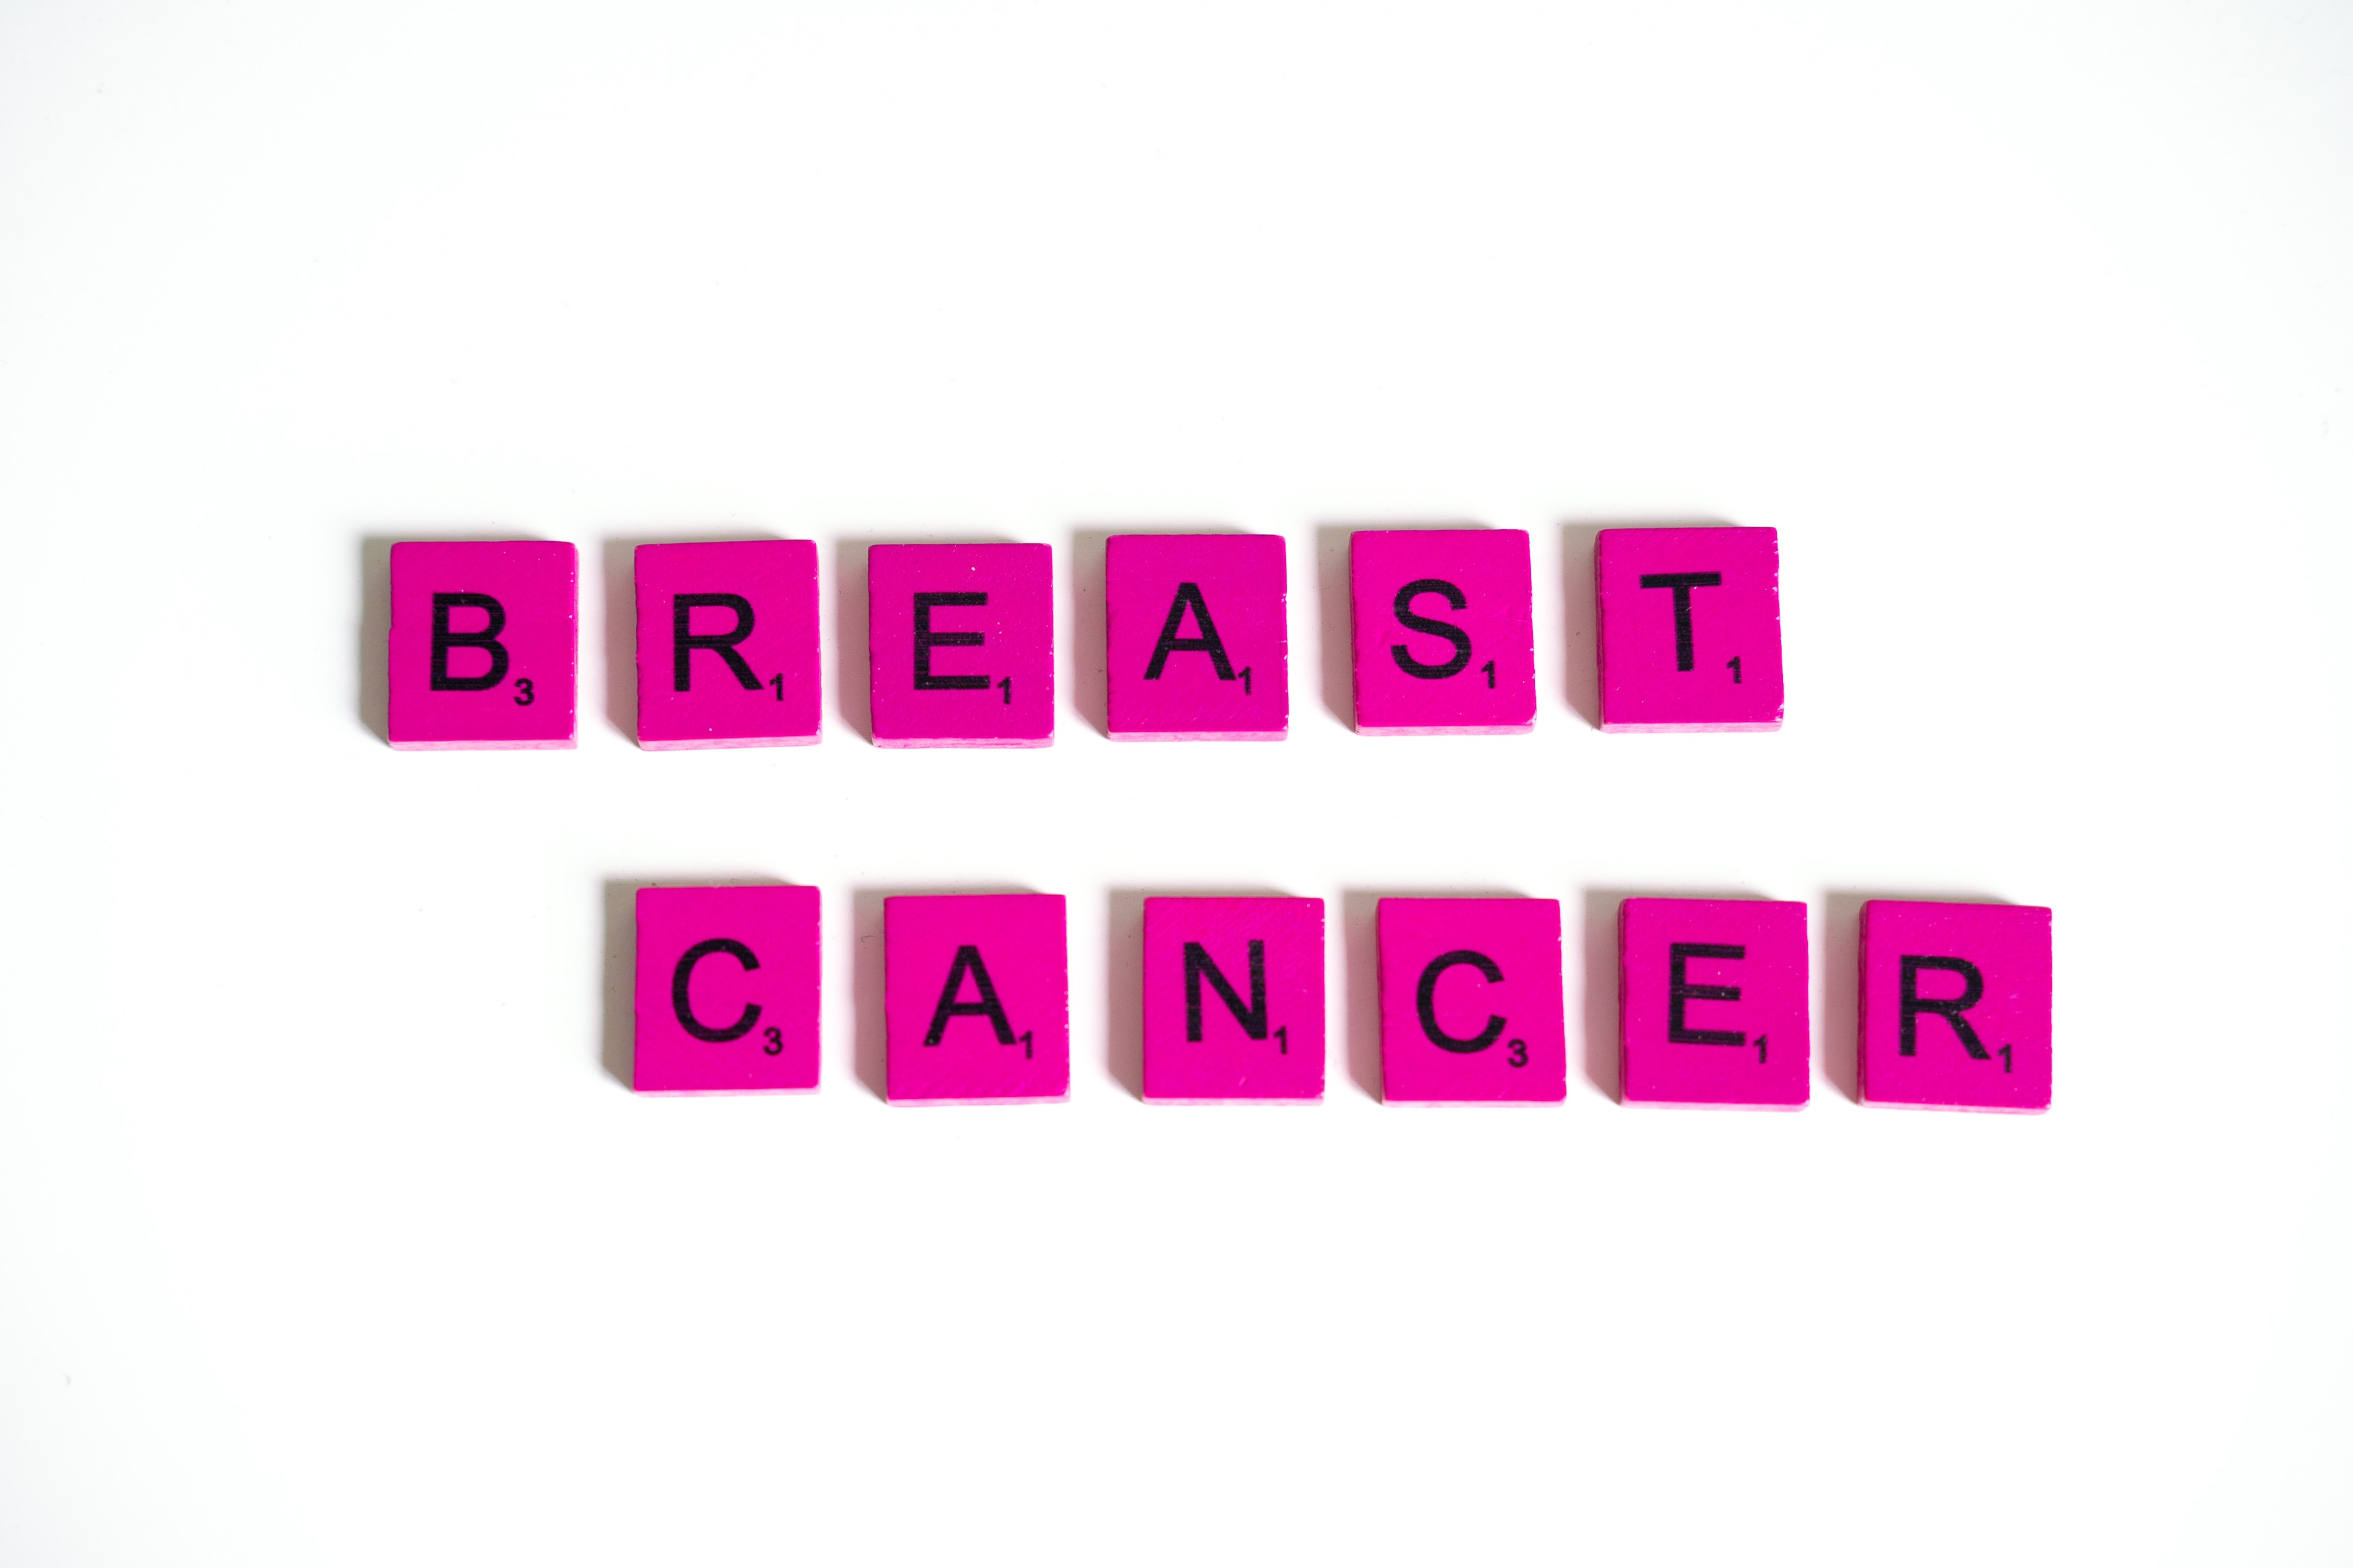 Breast Cancer Awareness Month is Here